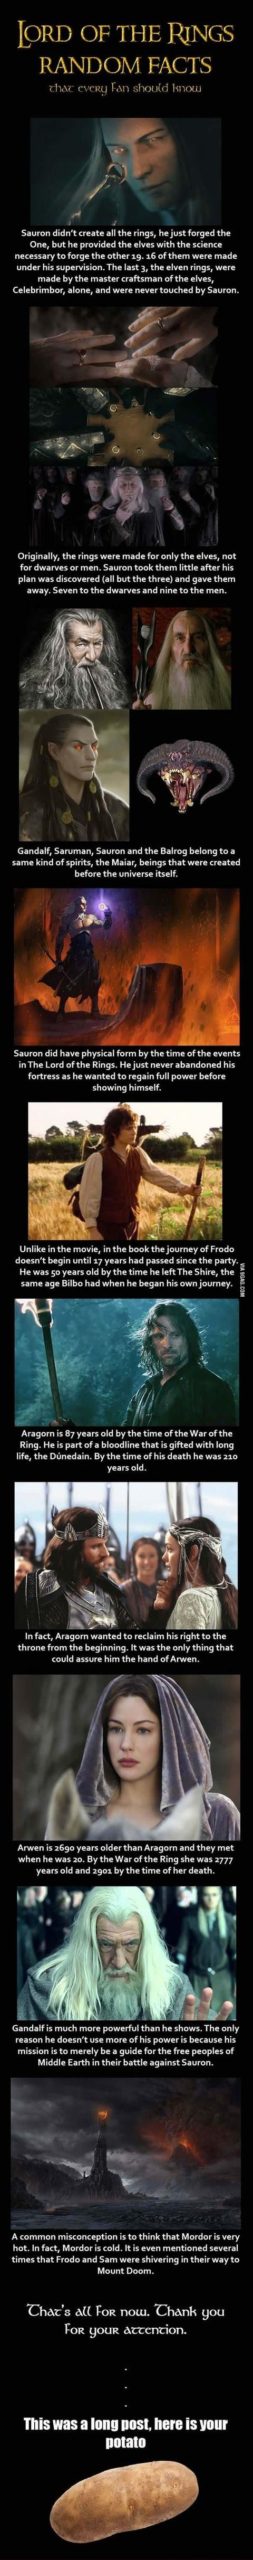 Lord+of+the+Rings+Random+Facts